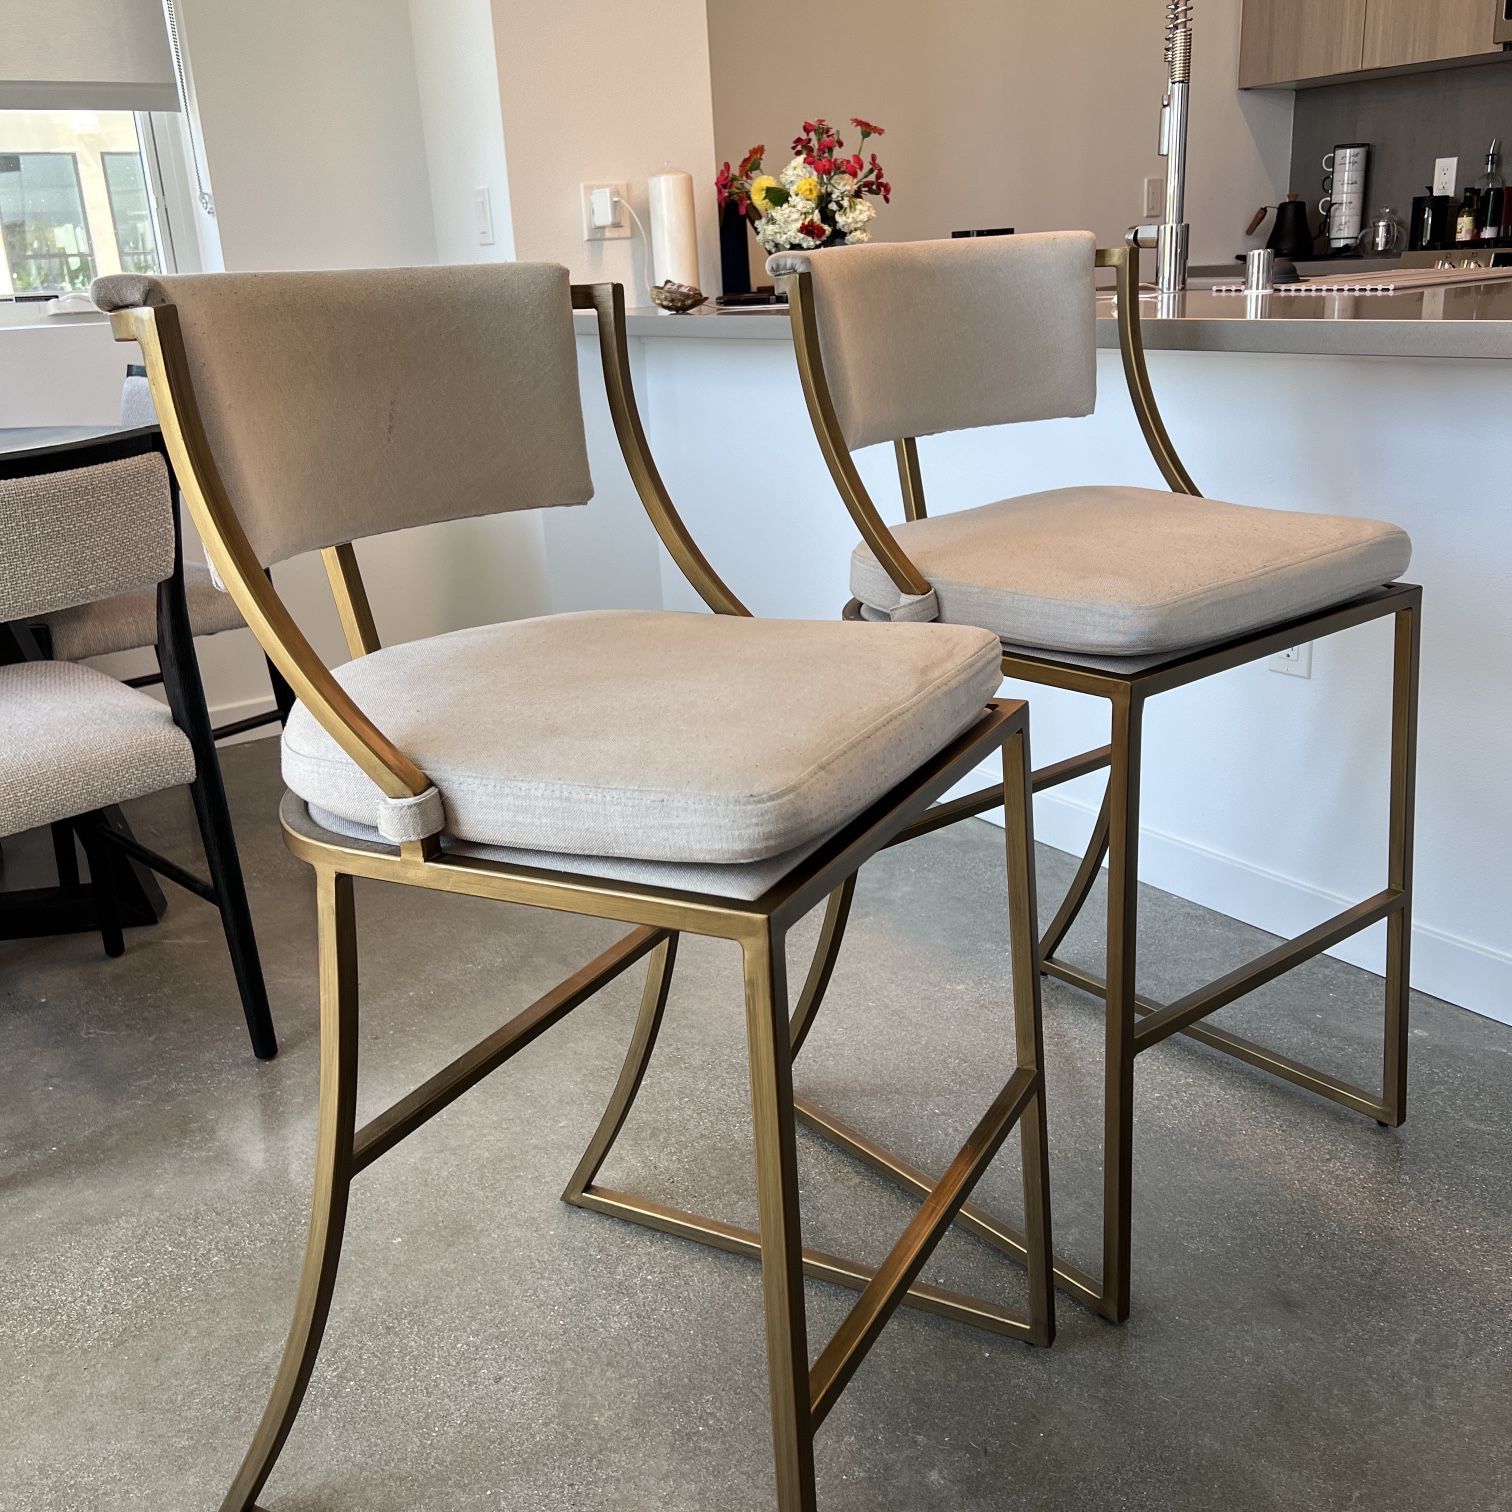 Gold and Linen Bar Stools